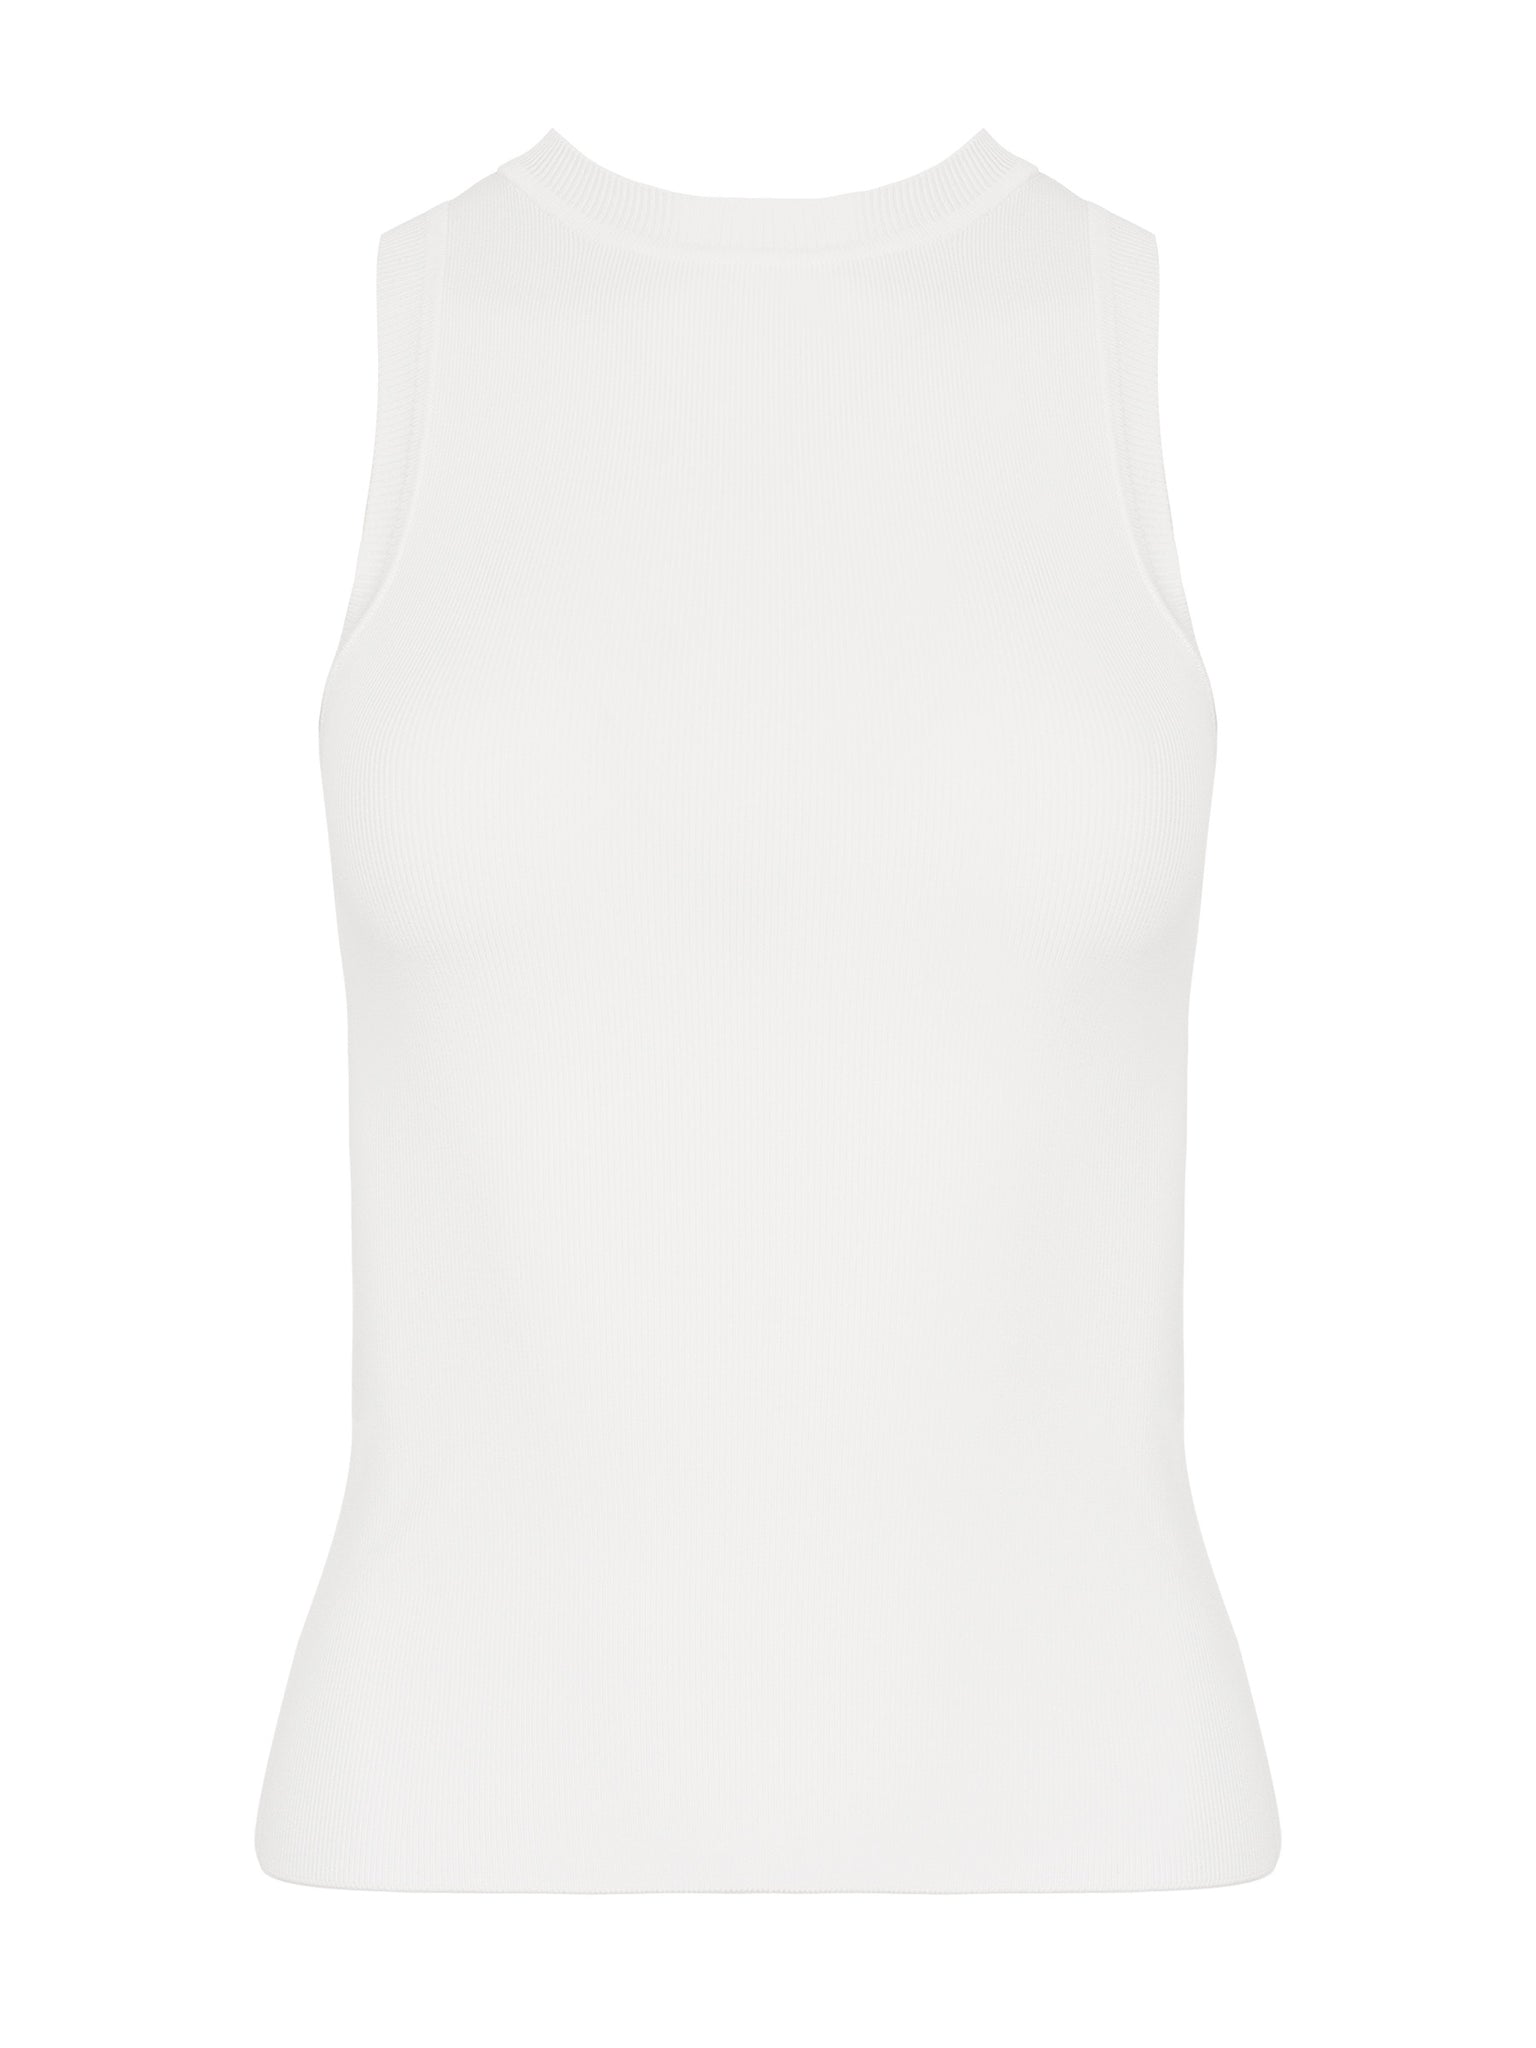 SIR The Label | Cecelia Tank in Ivory | The UNDONE by SIR.